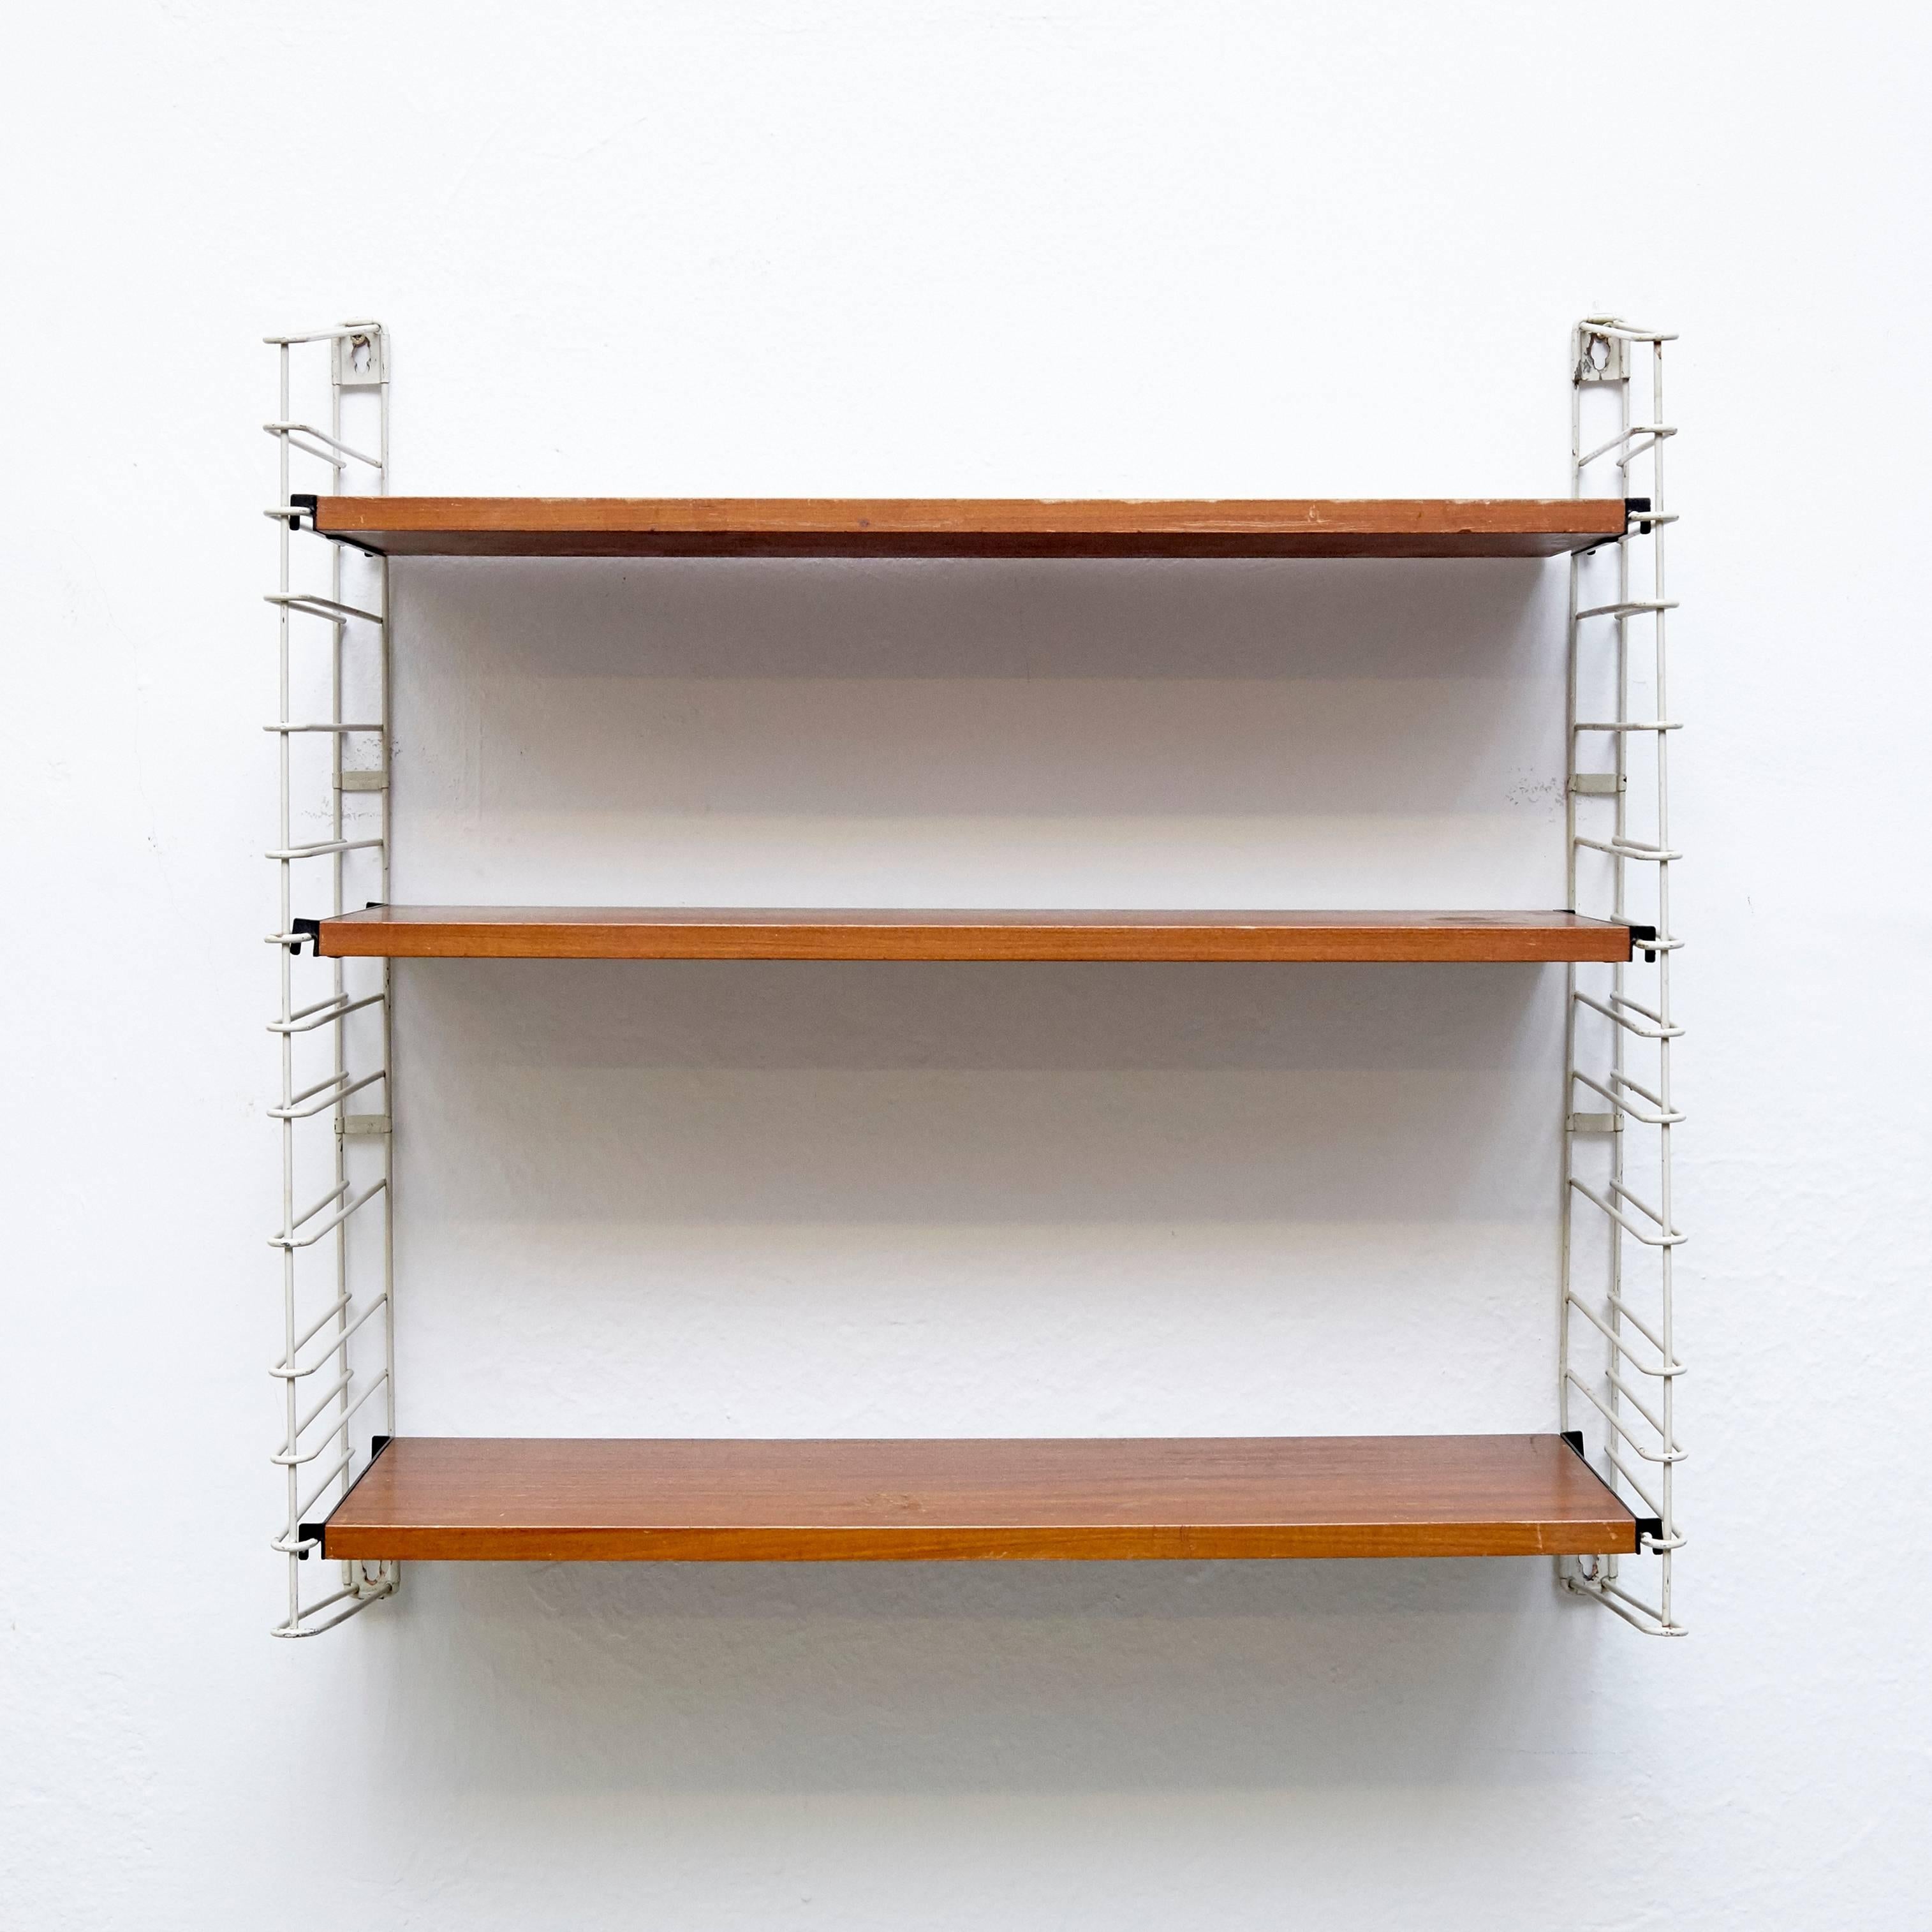 Modular shelves designed by Adriaan D. Dekker, circa 1960.
Manufactured by Tomado in the Netherlands.

It possible to fit multiple shelves together, thus achieving a personalized/modular shelving system.

In good original condition with minor